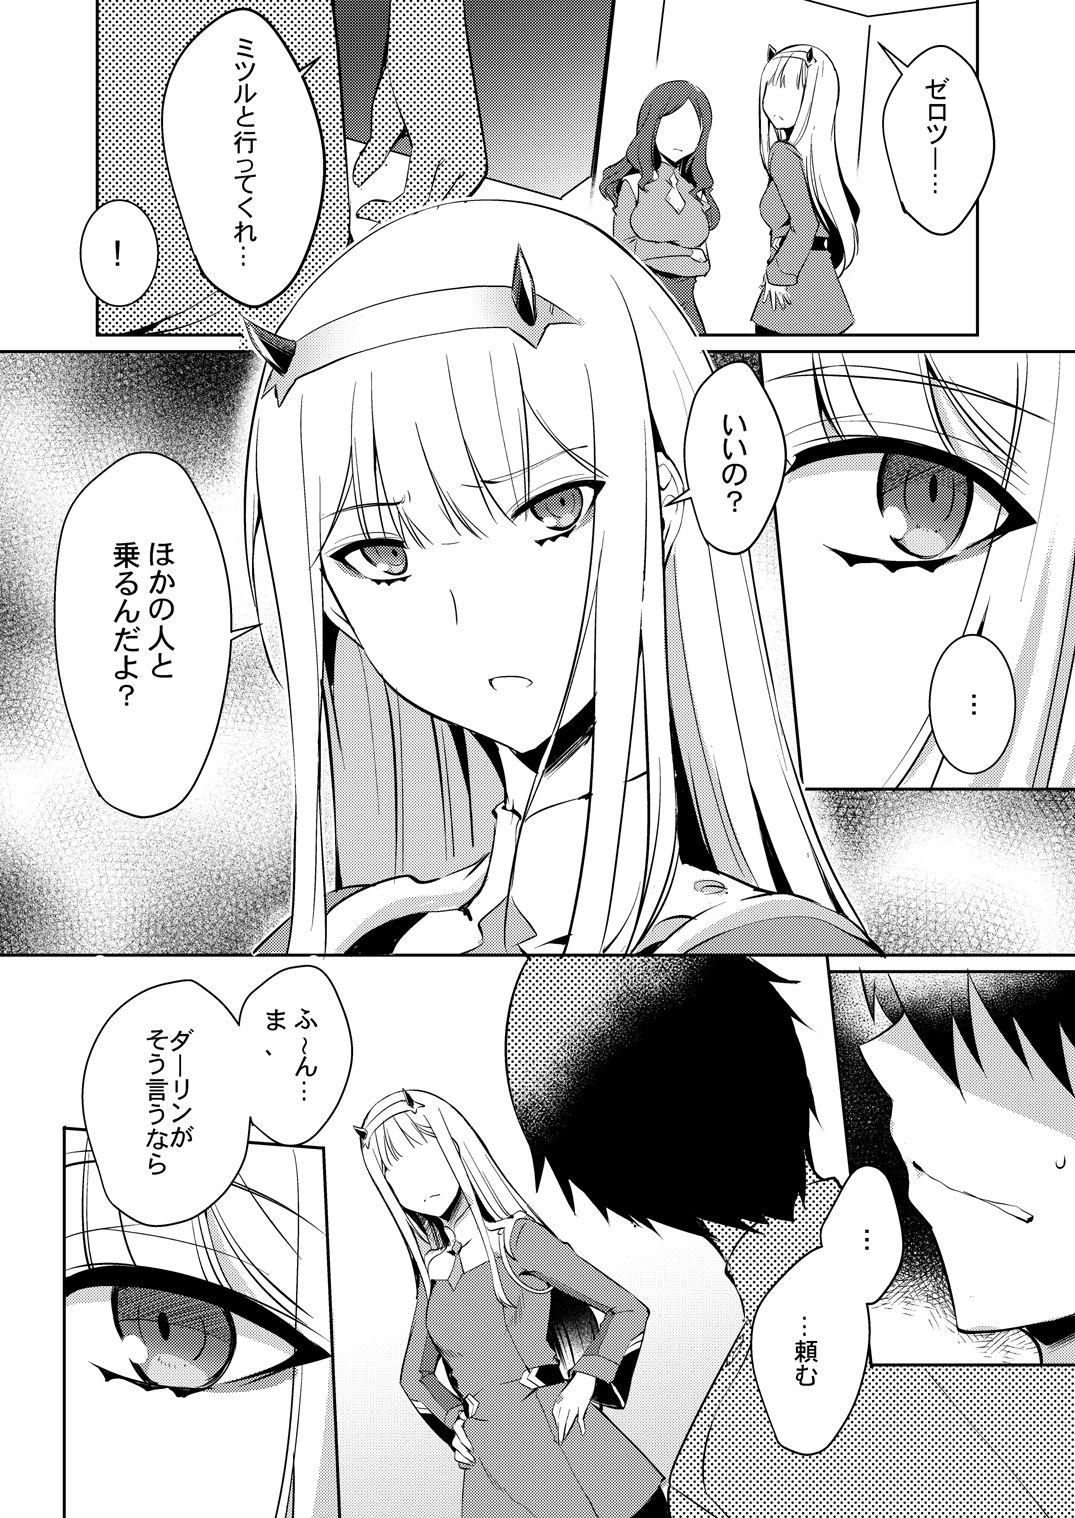 Corrida Mitsuru in the Zero Two - Darling in the franxx Gay Physicals - Page 6